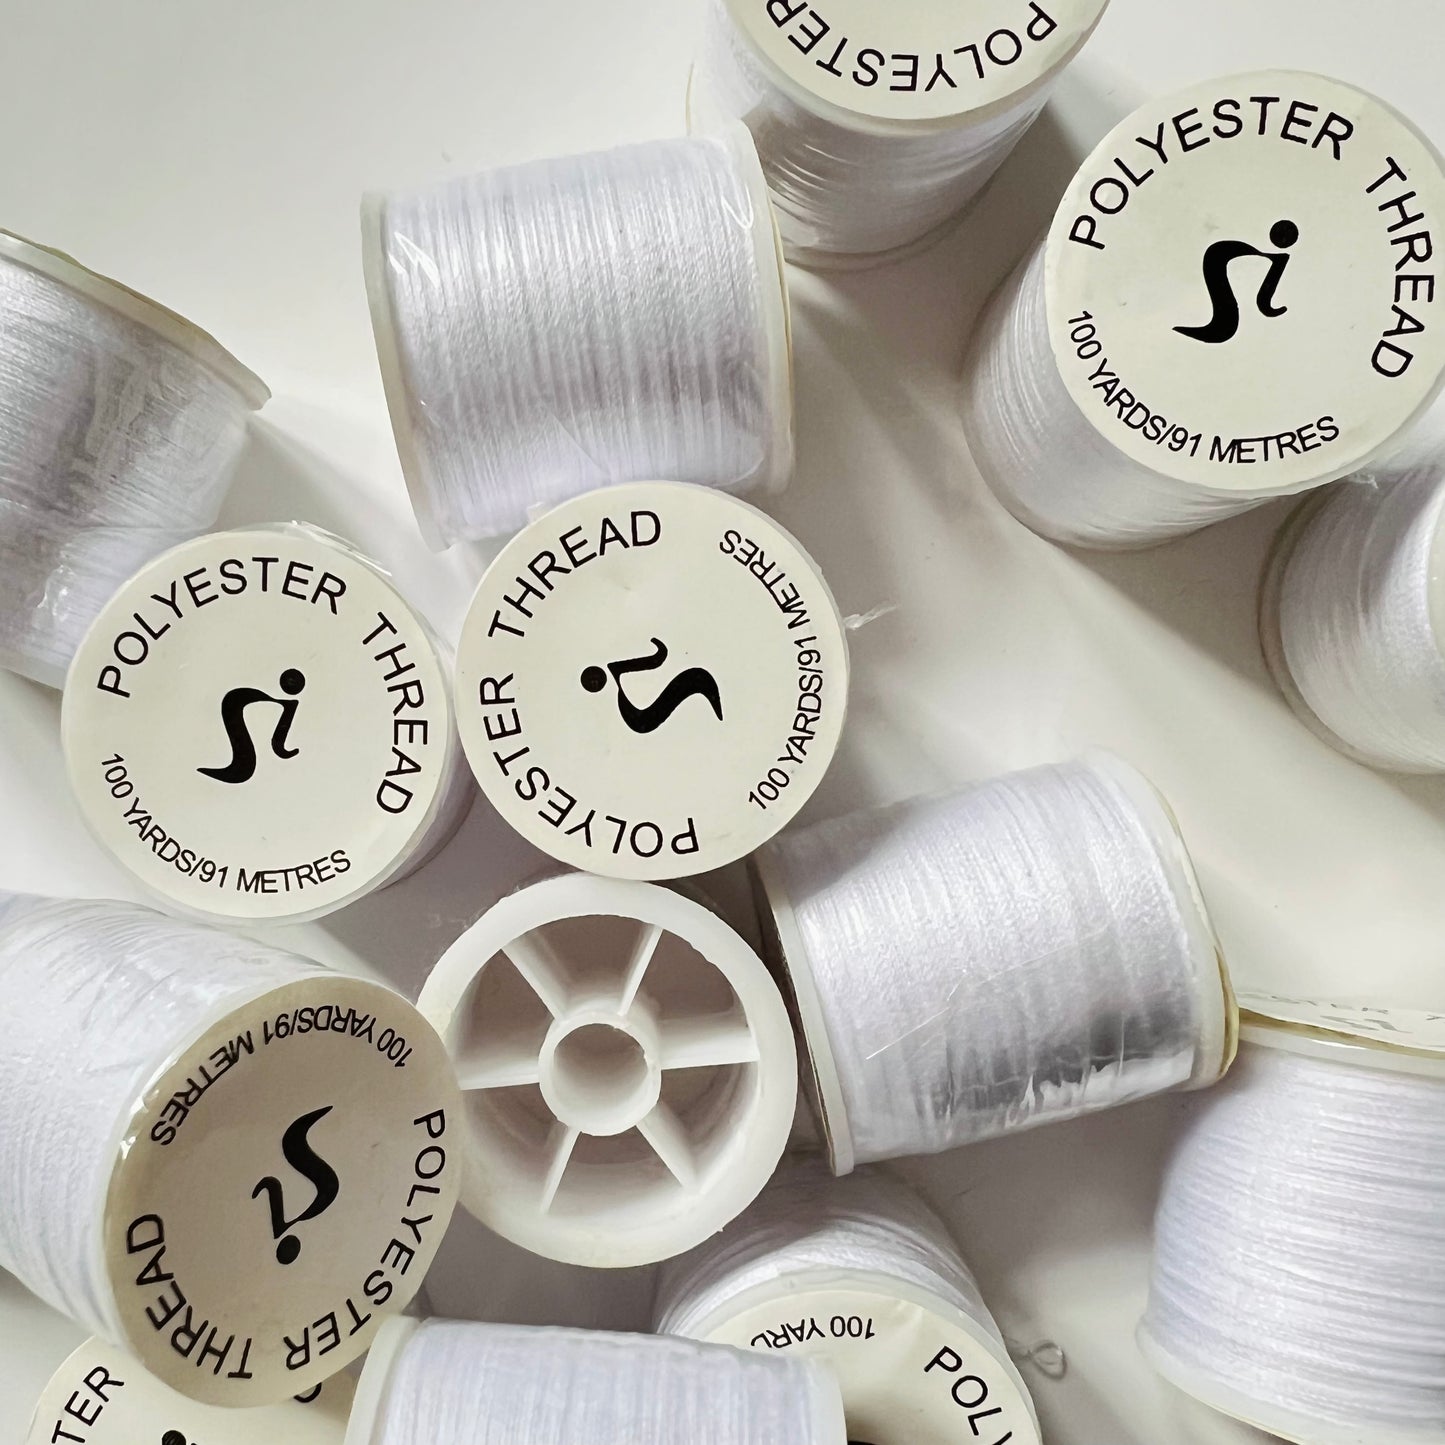 White Polyester Sewing Thread - 100 Yard Spools